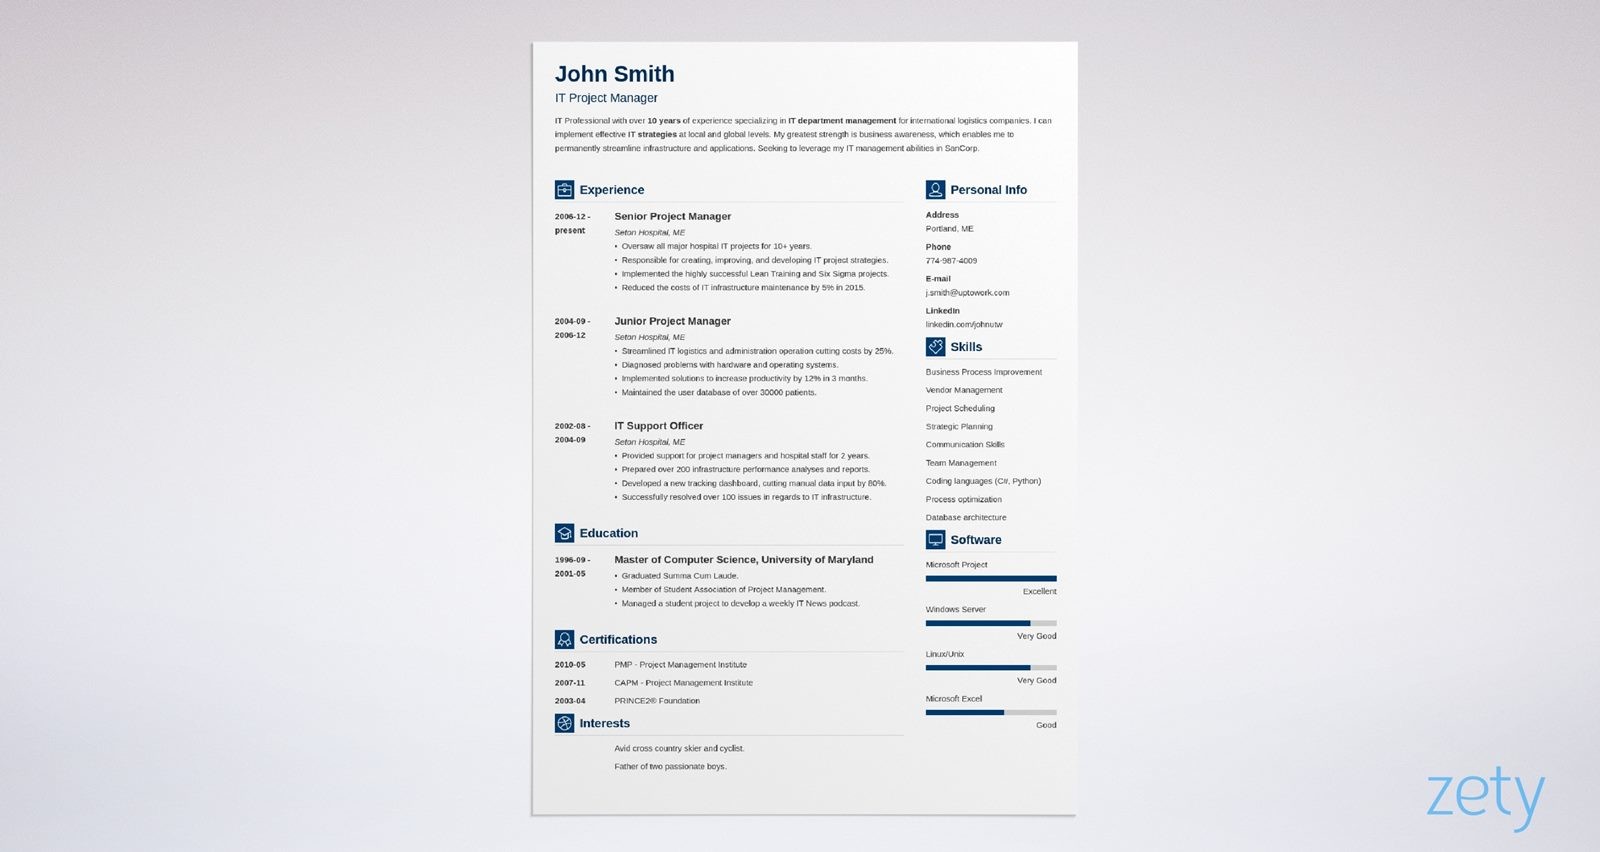 Blank Resume Template Download from cdn-images.zety.com